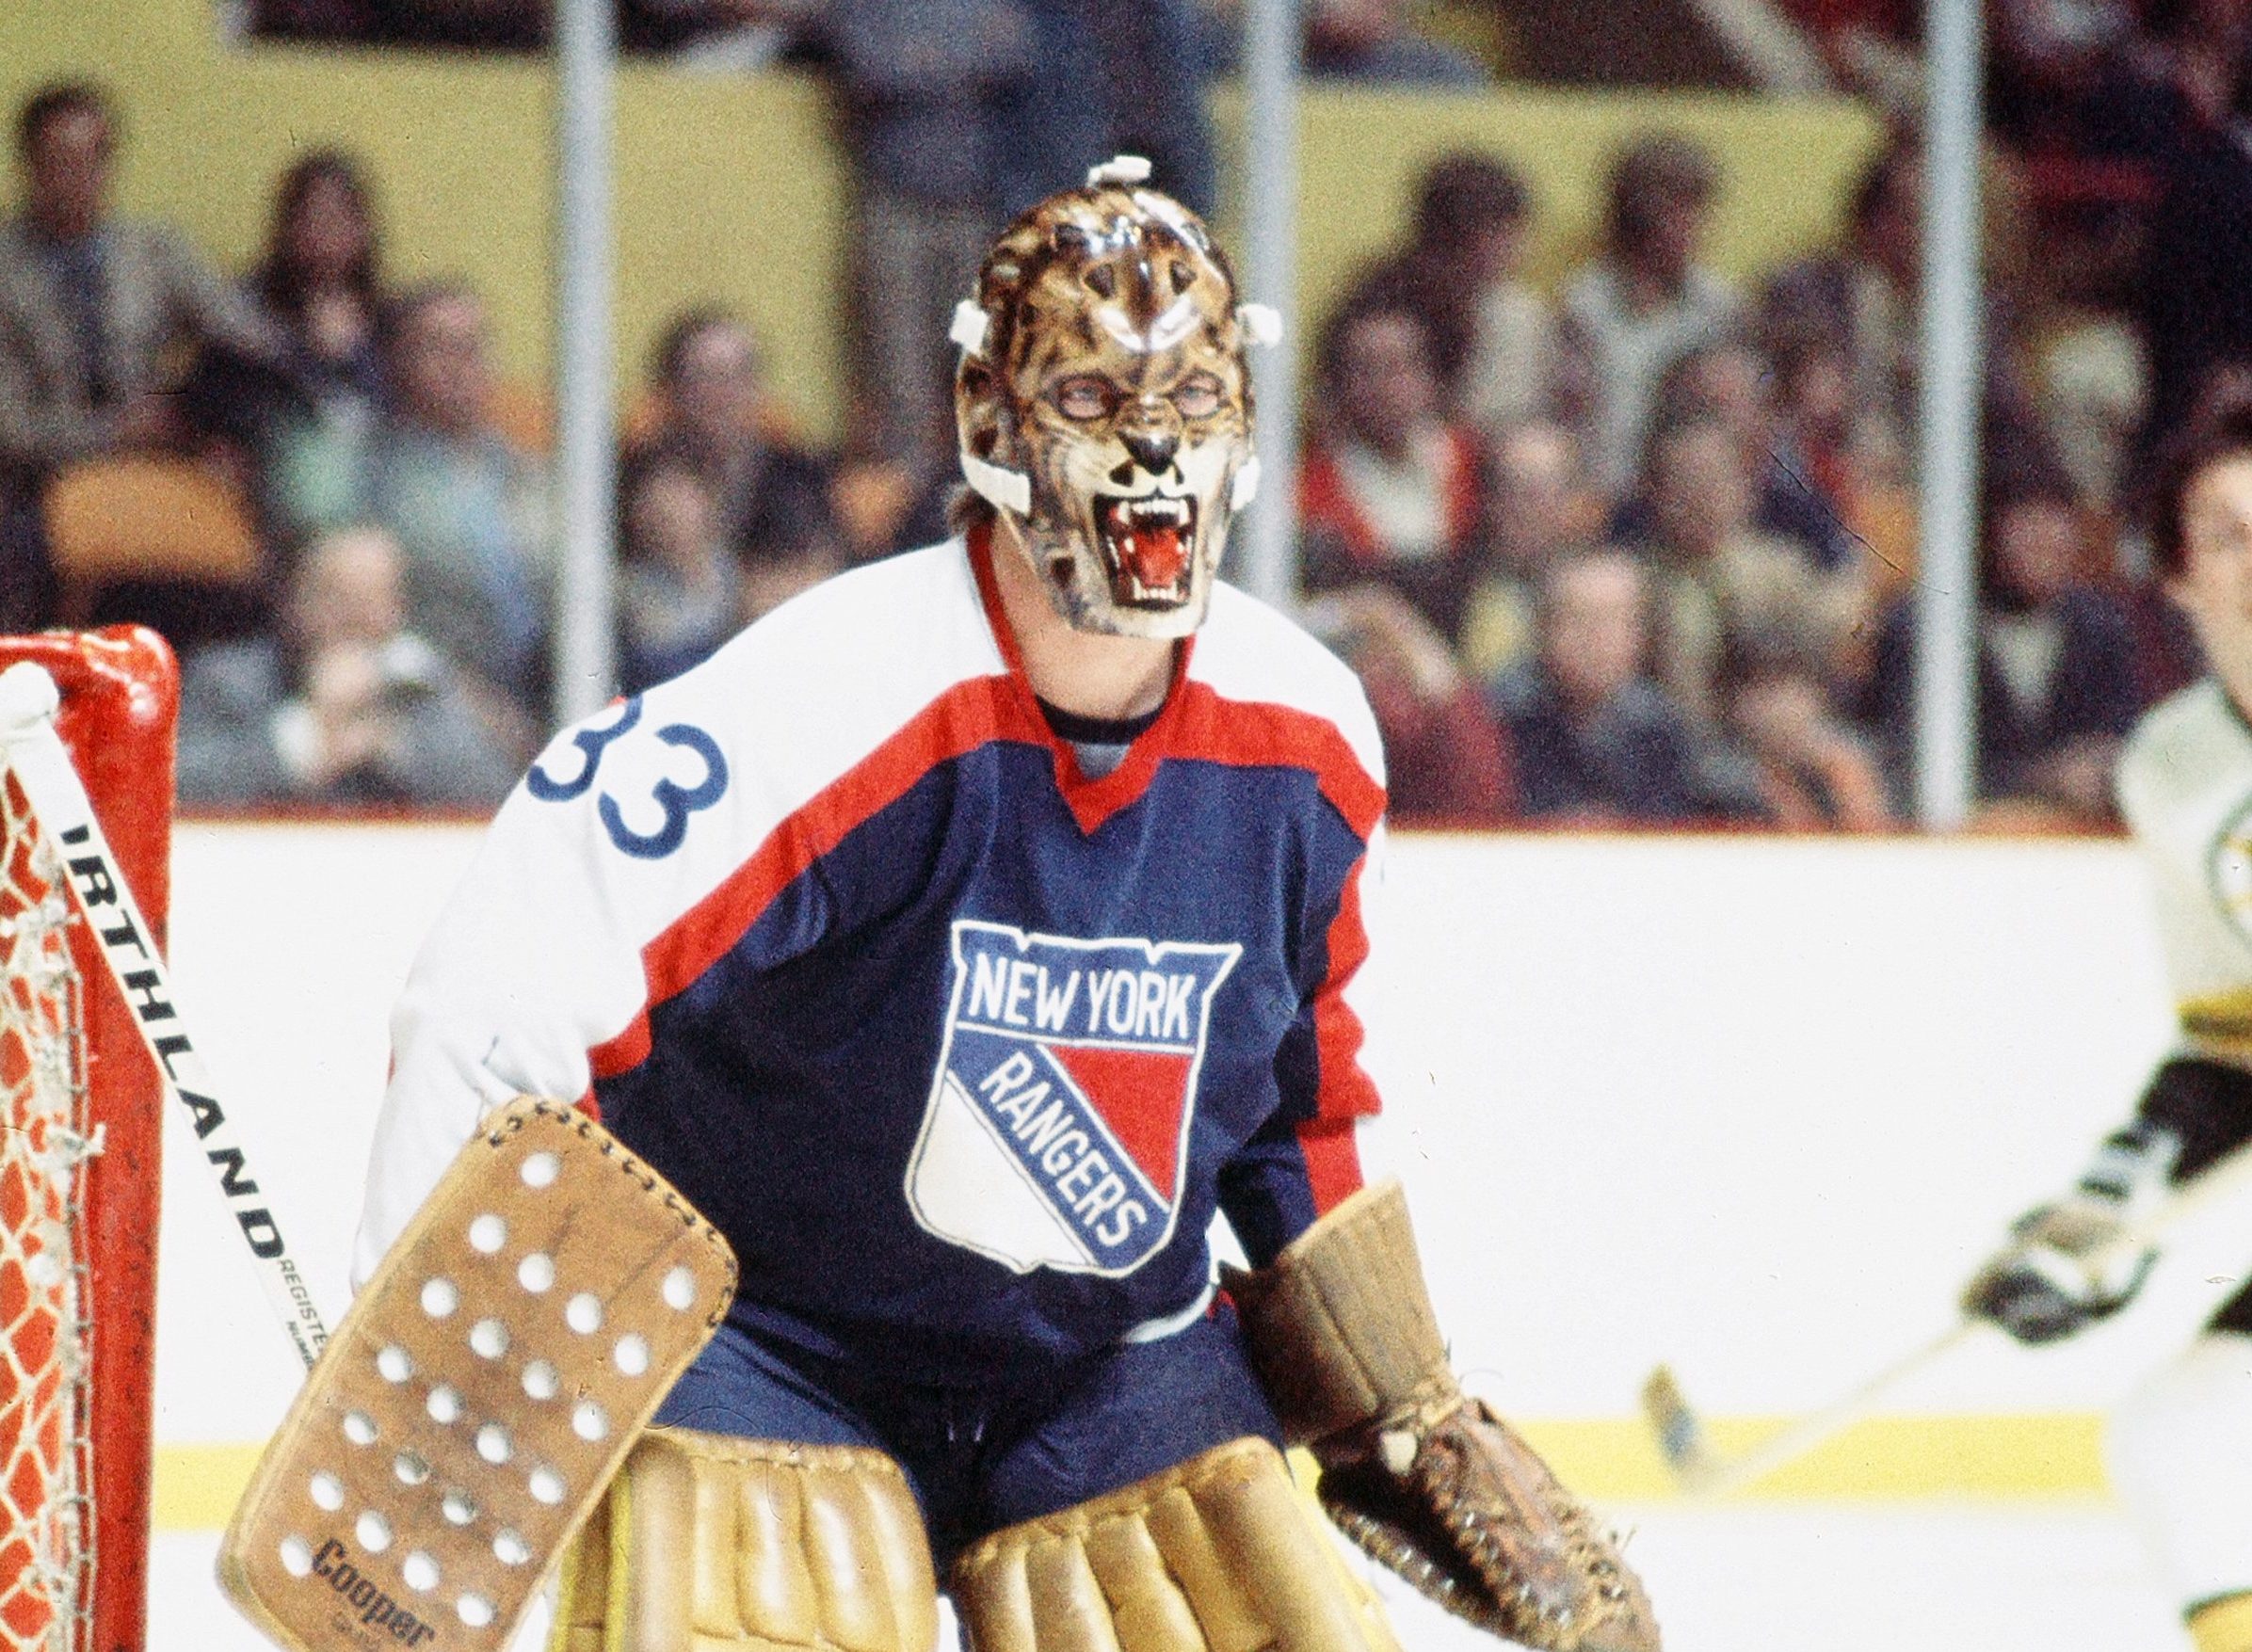 Is it just me, or did goalies from the '90s have the best masks